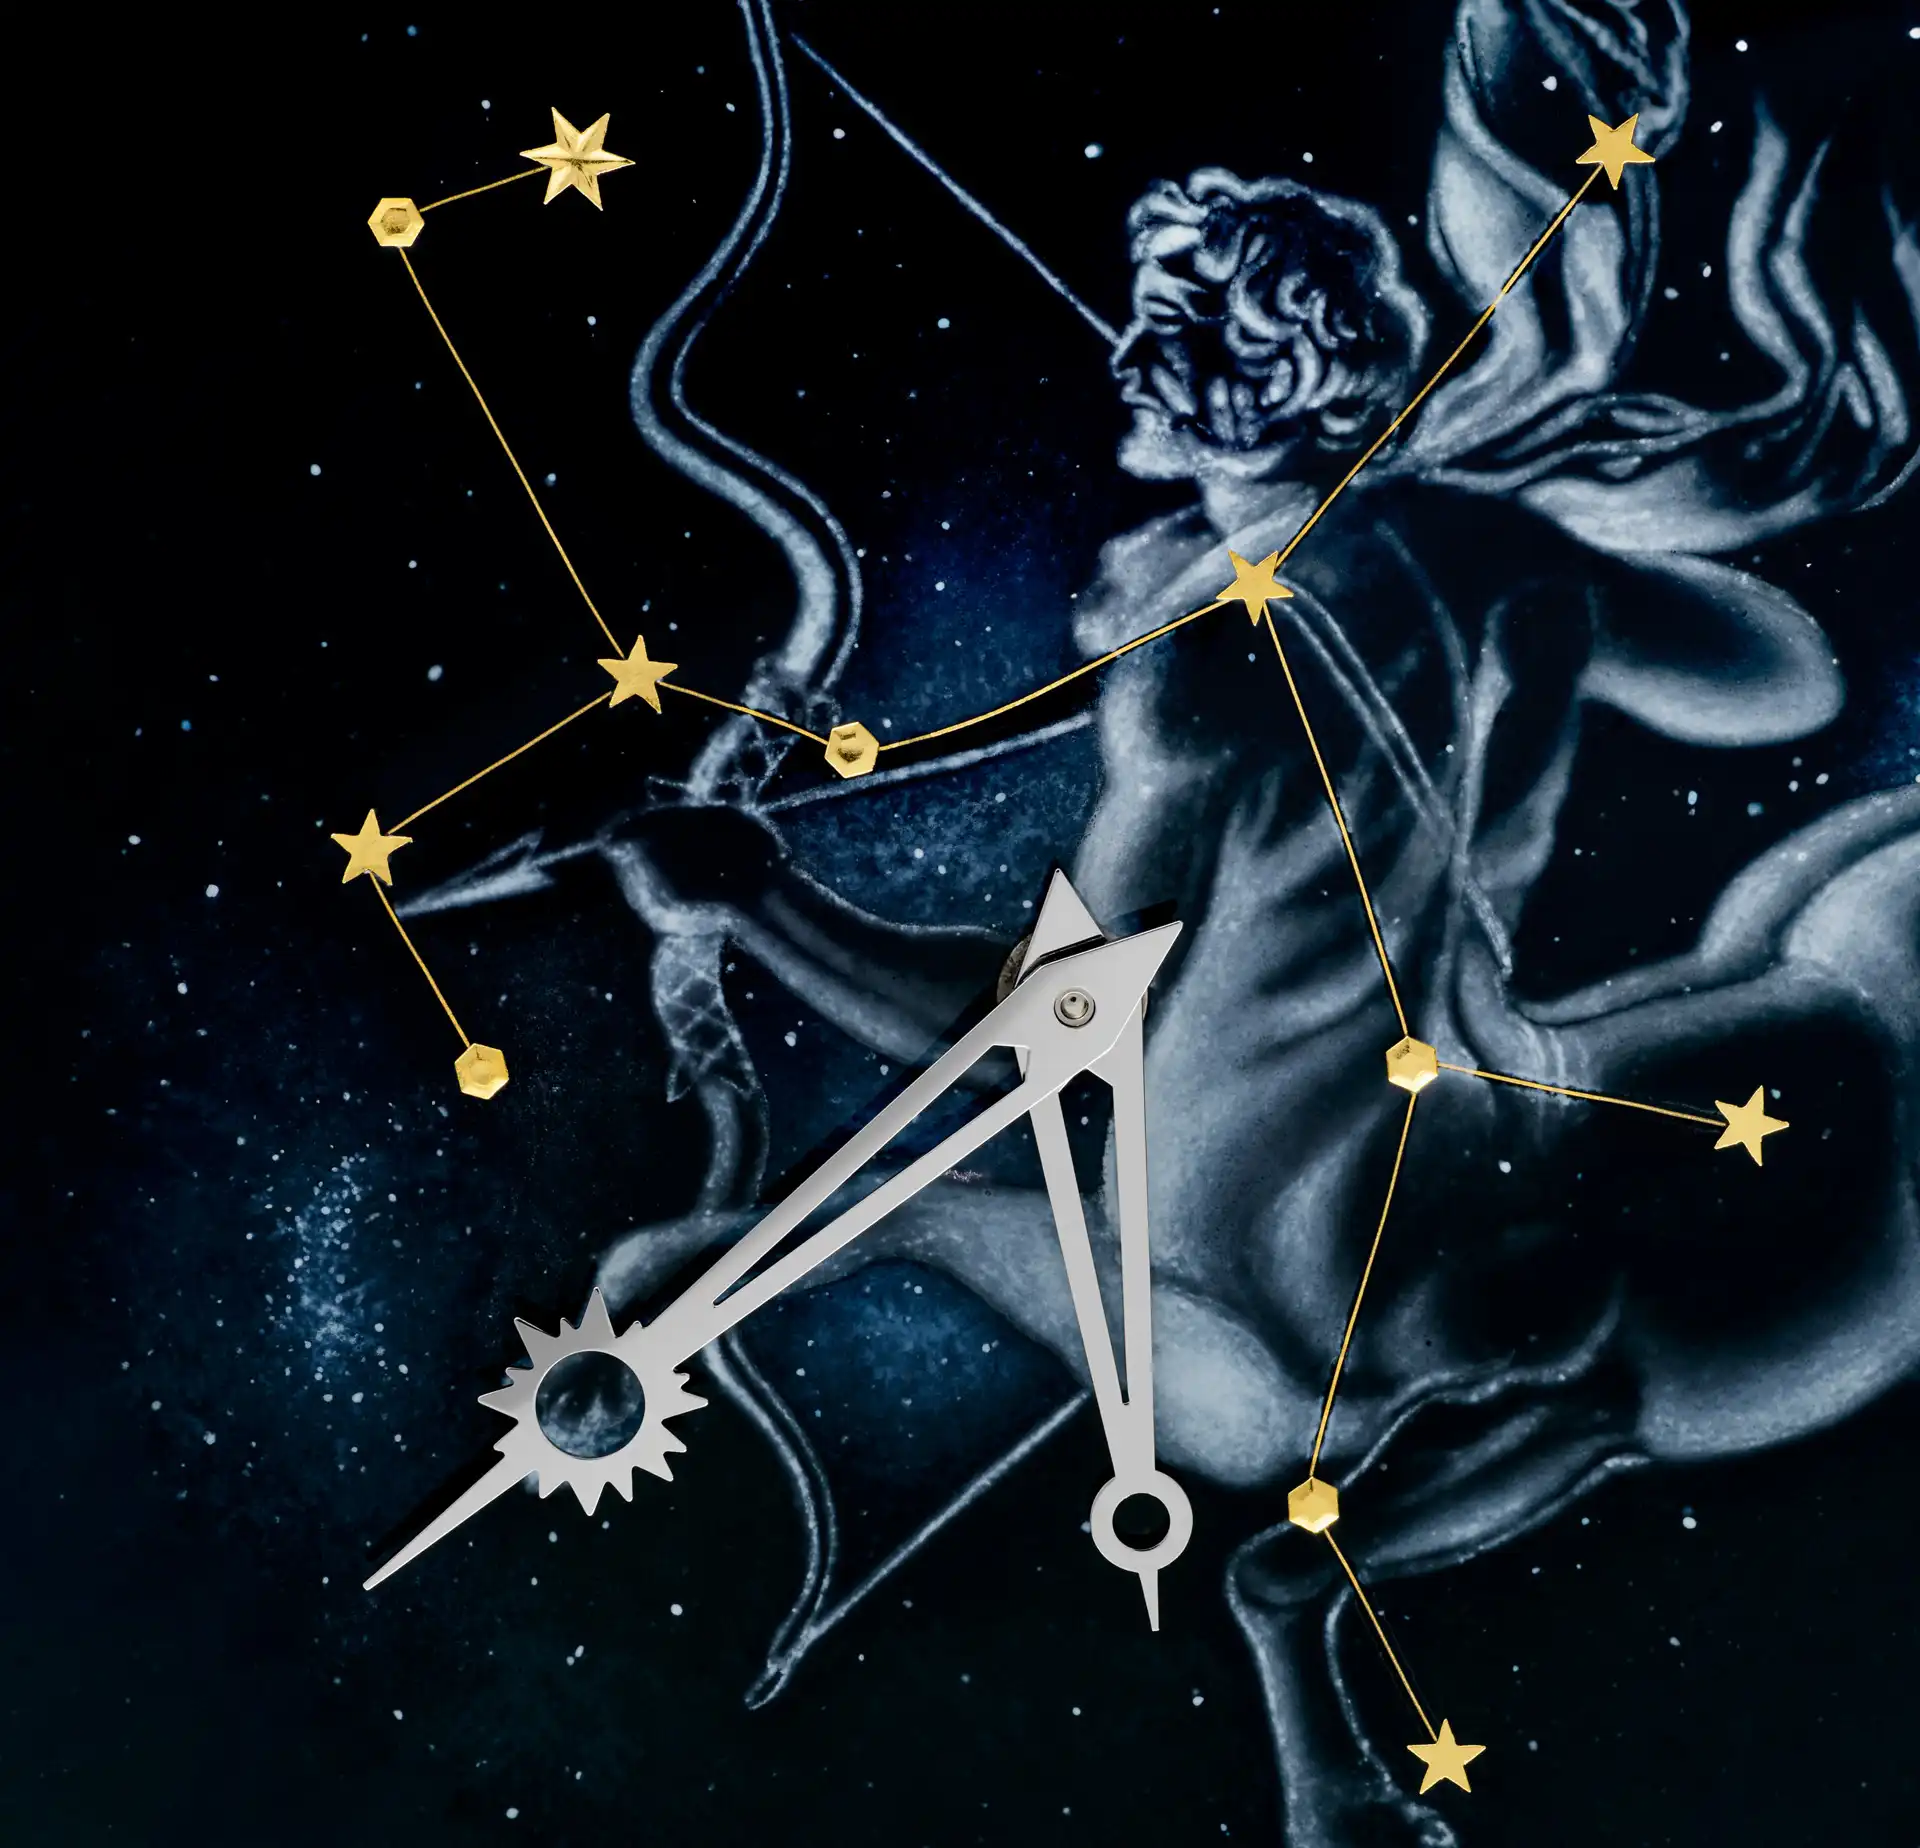 All the constellations of the zodiac